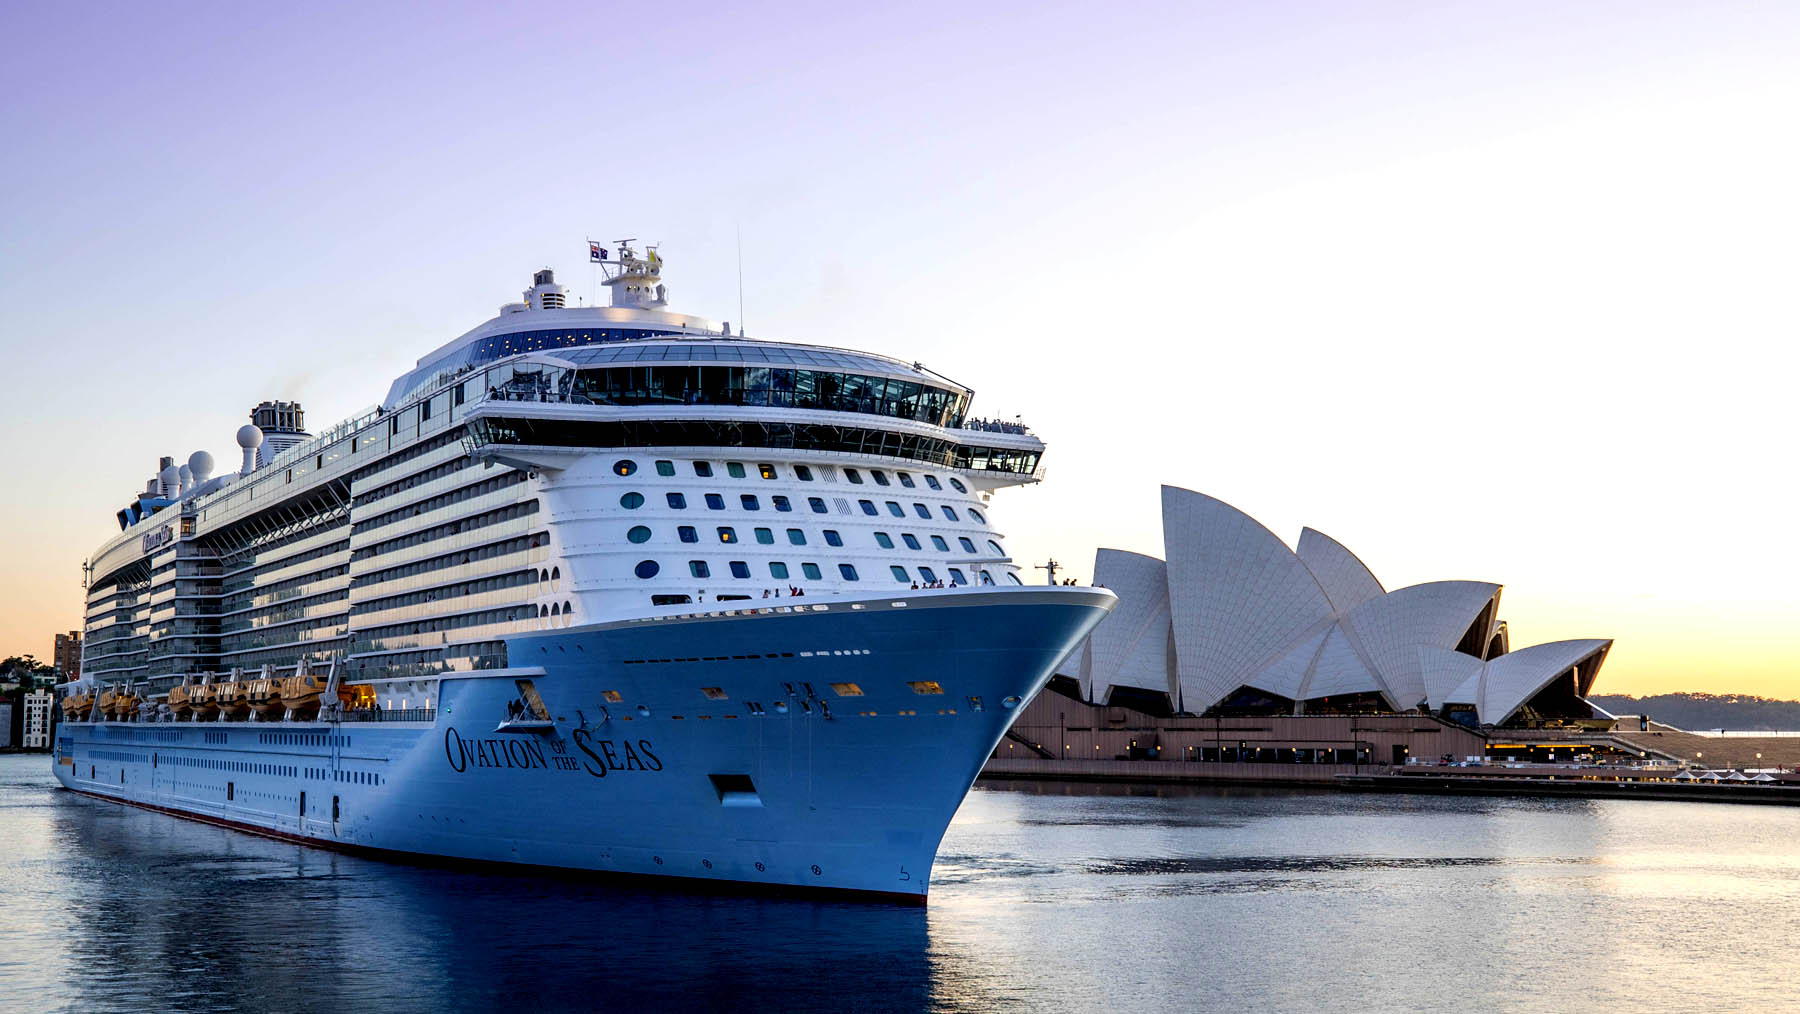 Ovation of the Seas offers sampler cruises from Sydney. 